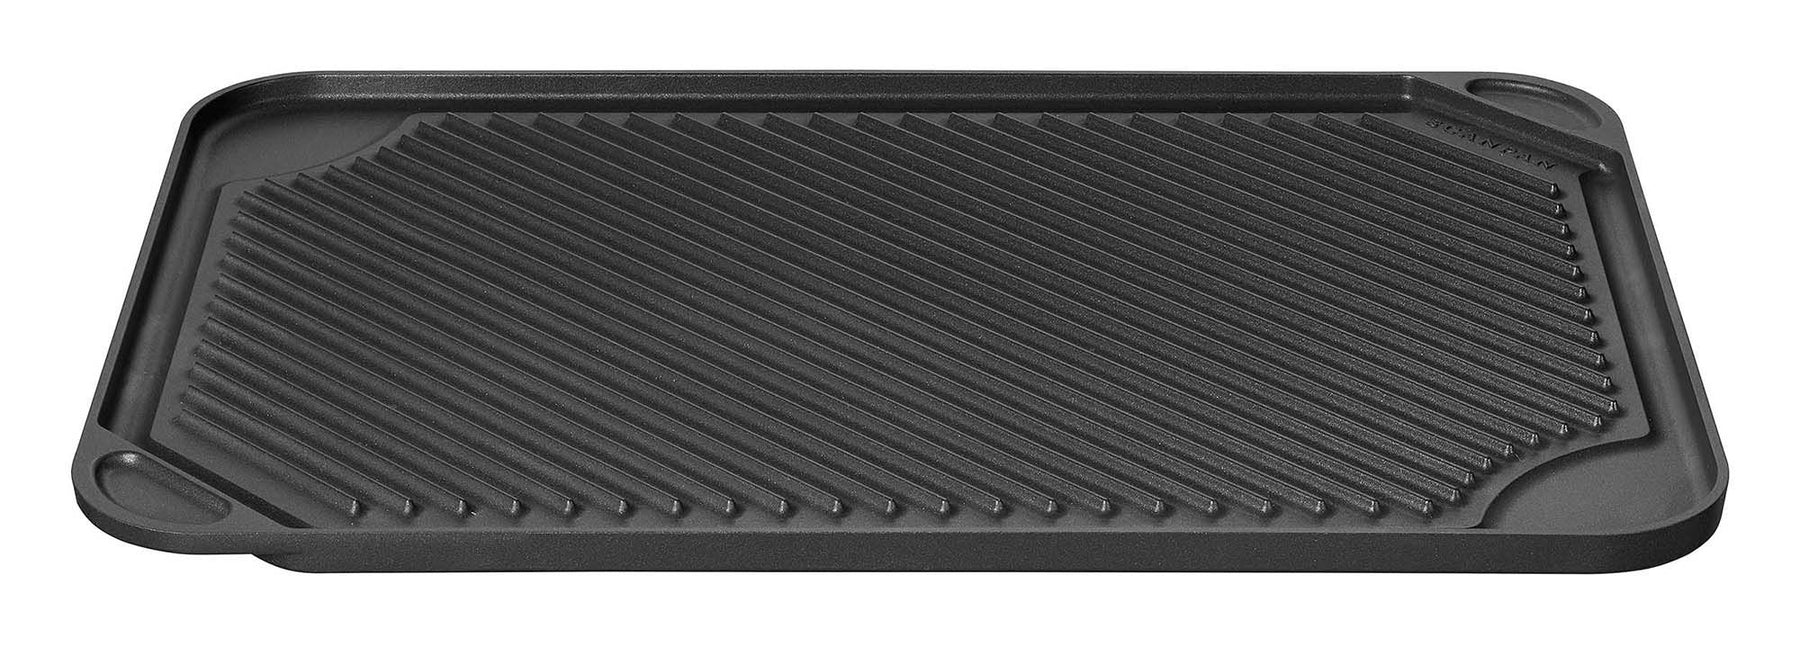 Scanpan Classic 18 x 12 Inch Double Burner Stovetop Grill